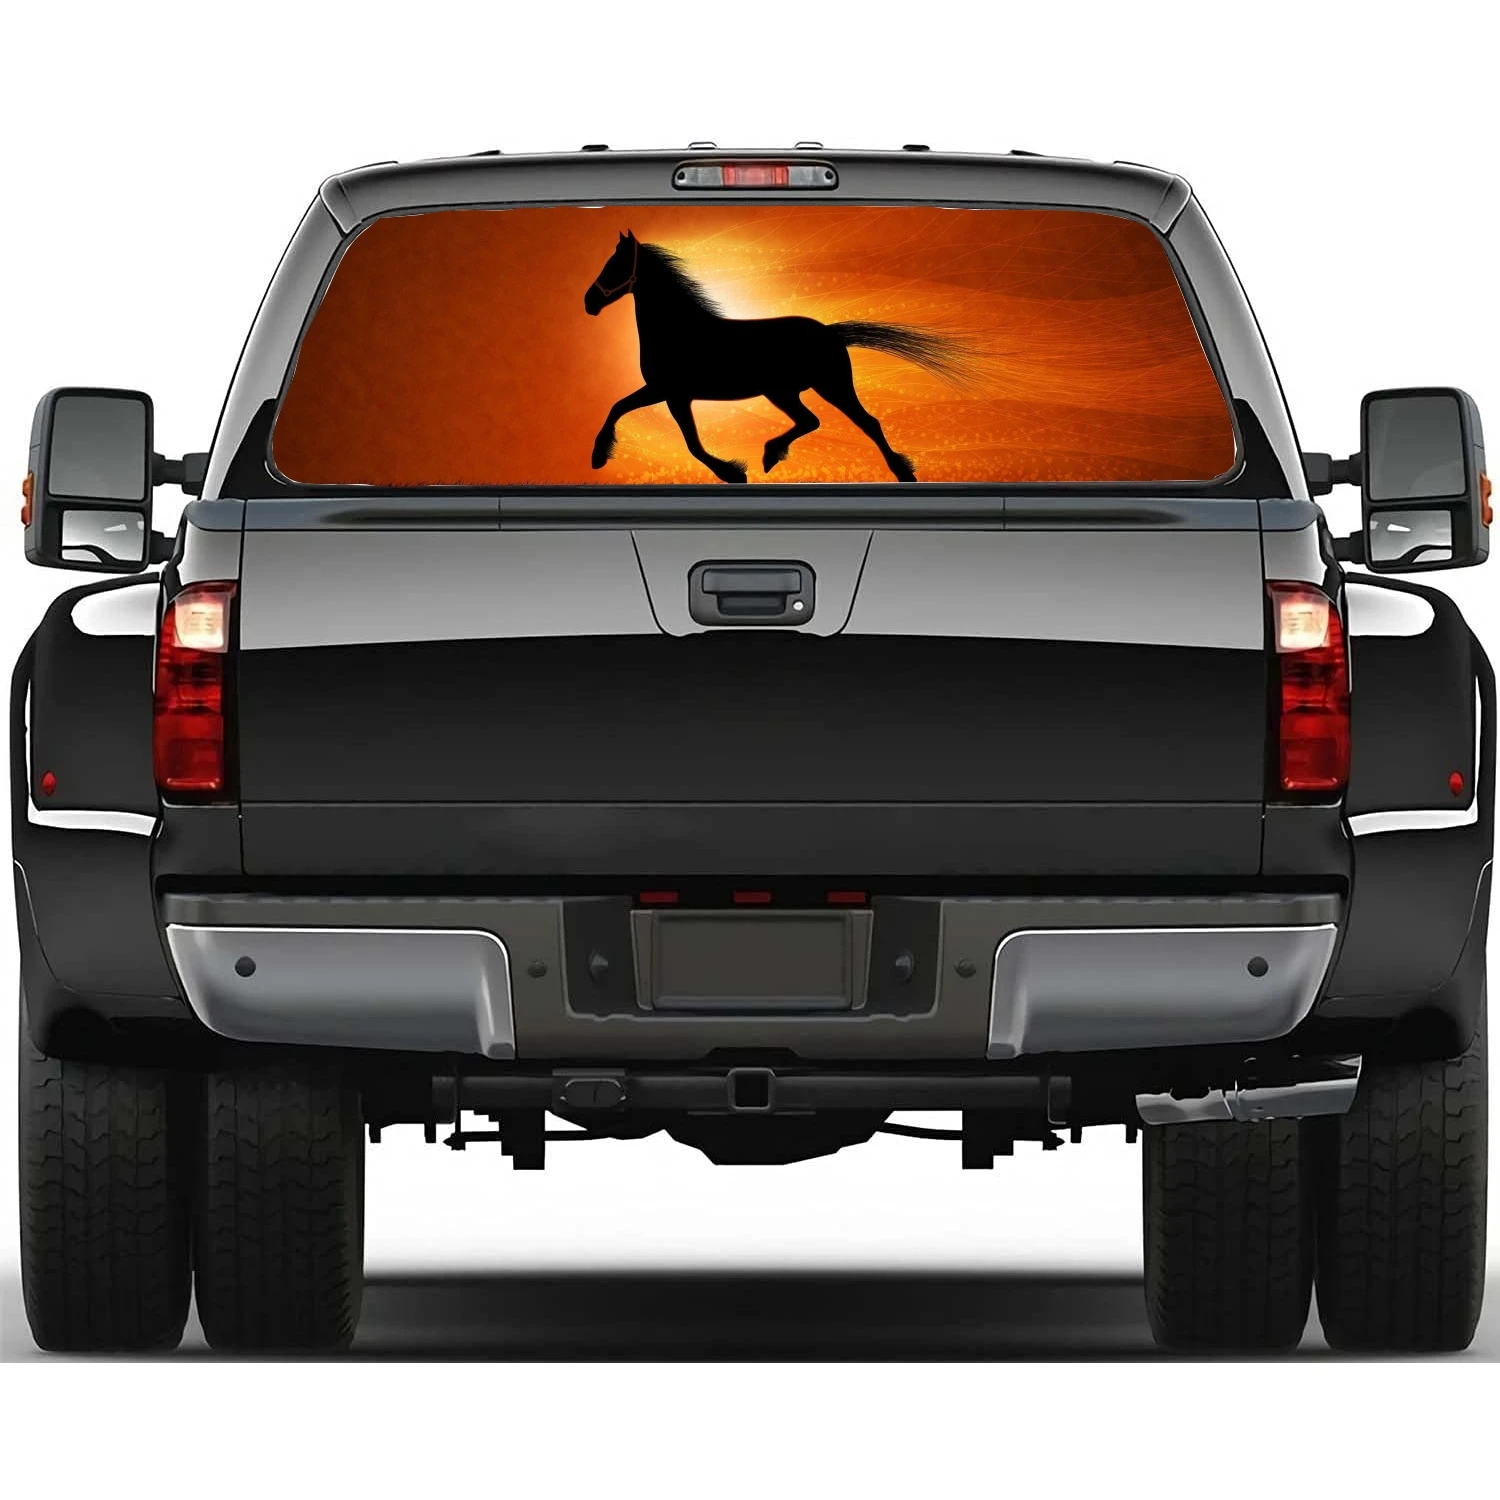 

Sunset Running Horse Car Rear Windshield Sticker Truck Window See Through Perforated Back Glass-Window Vinyl Decal Decoration